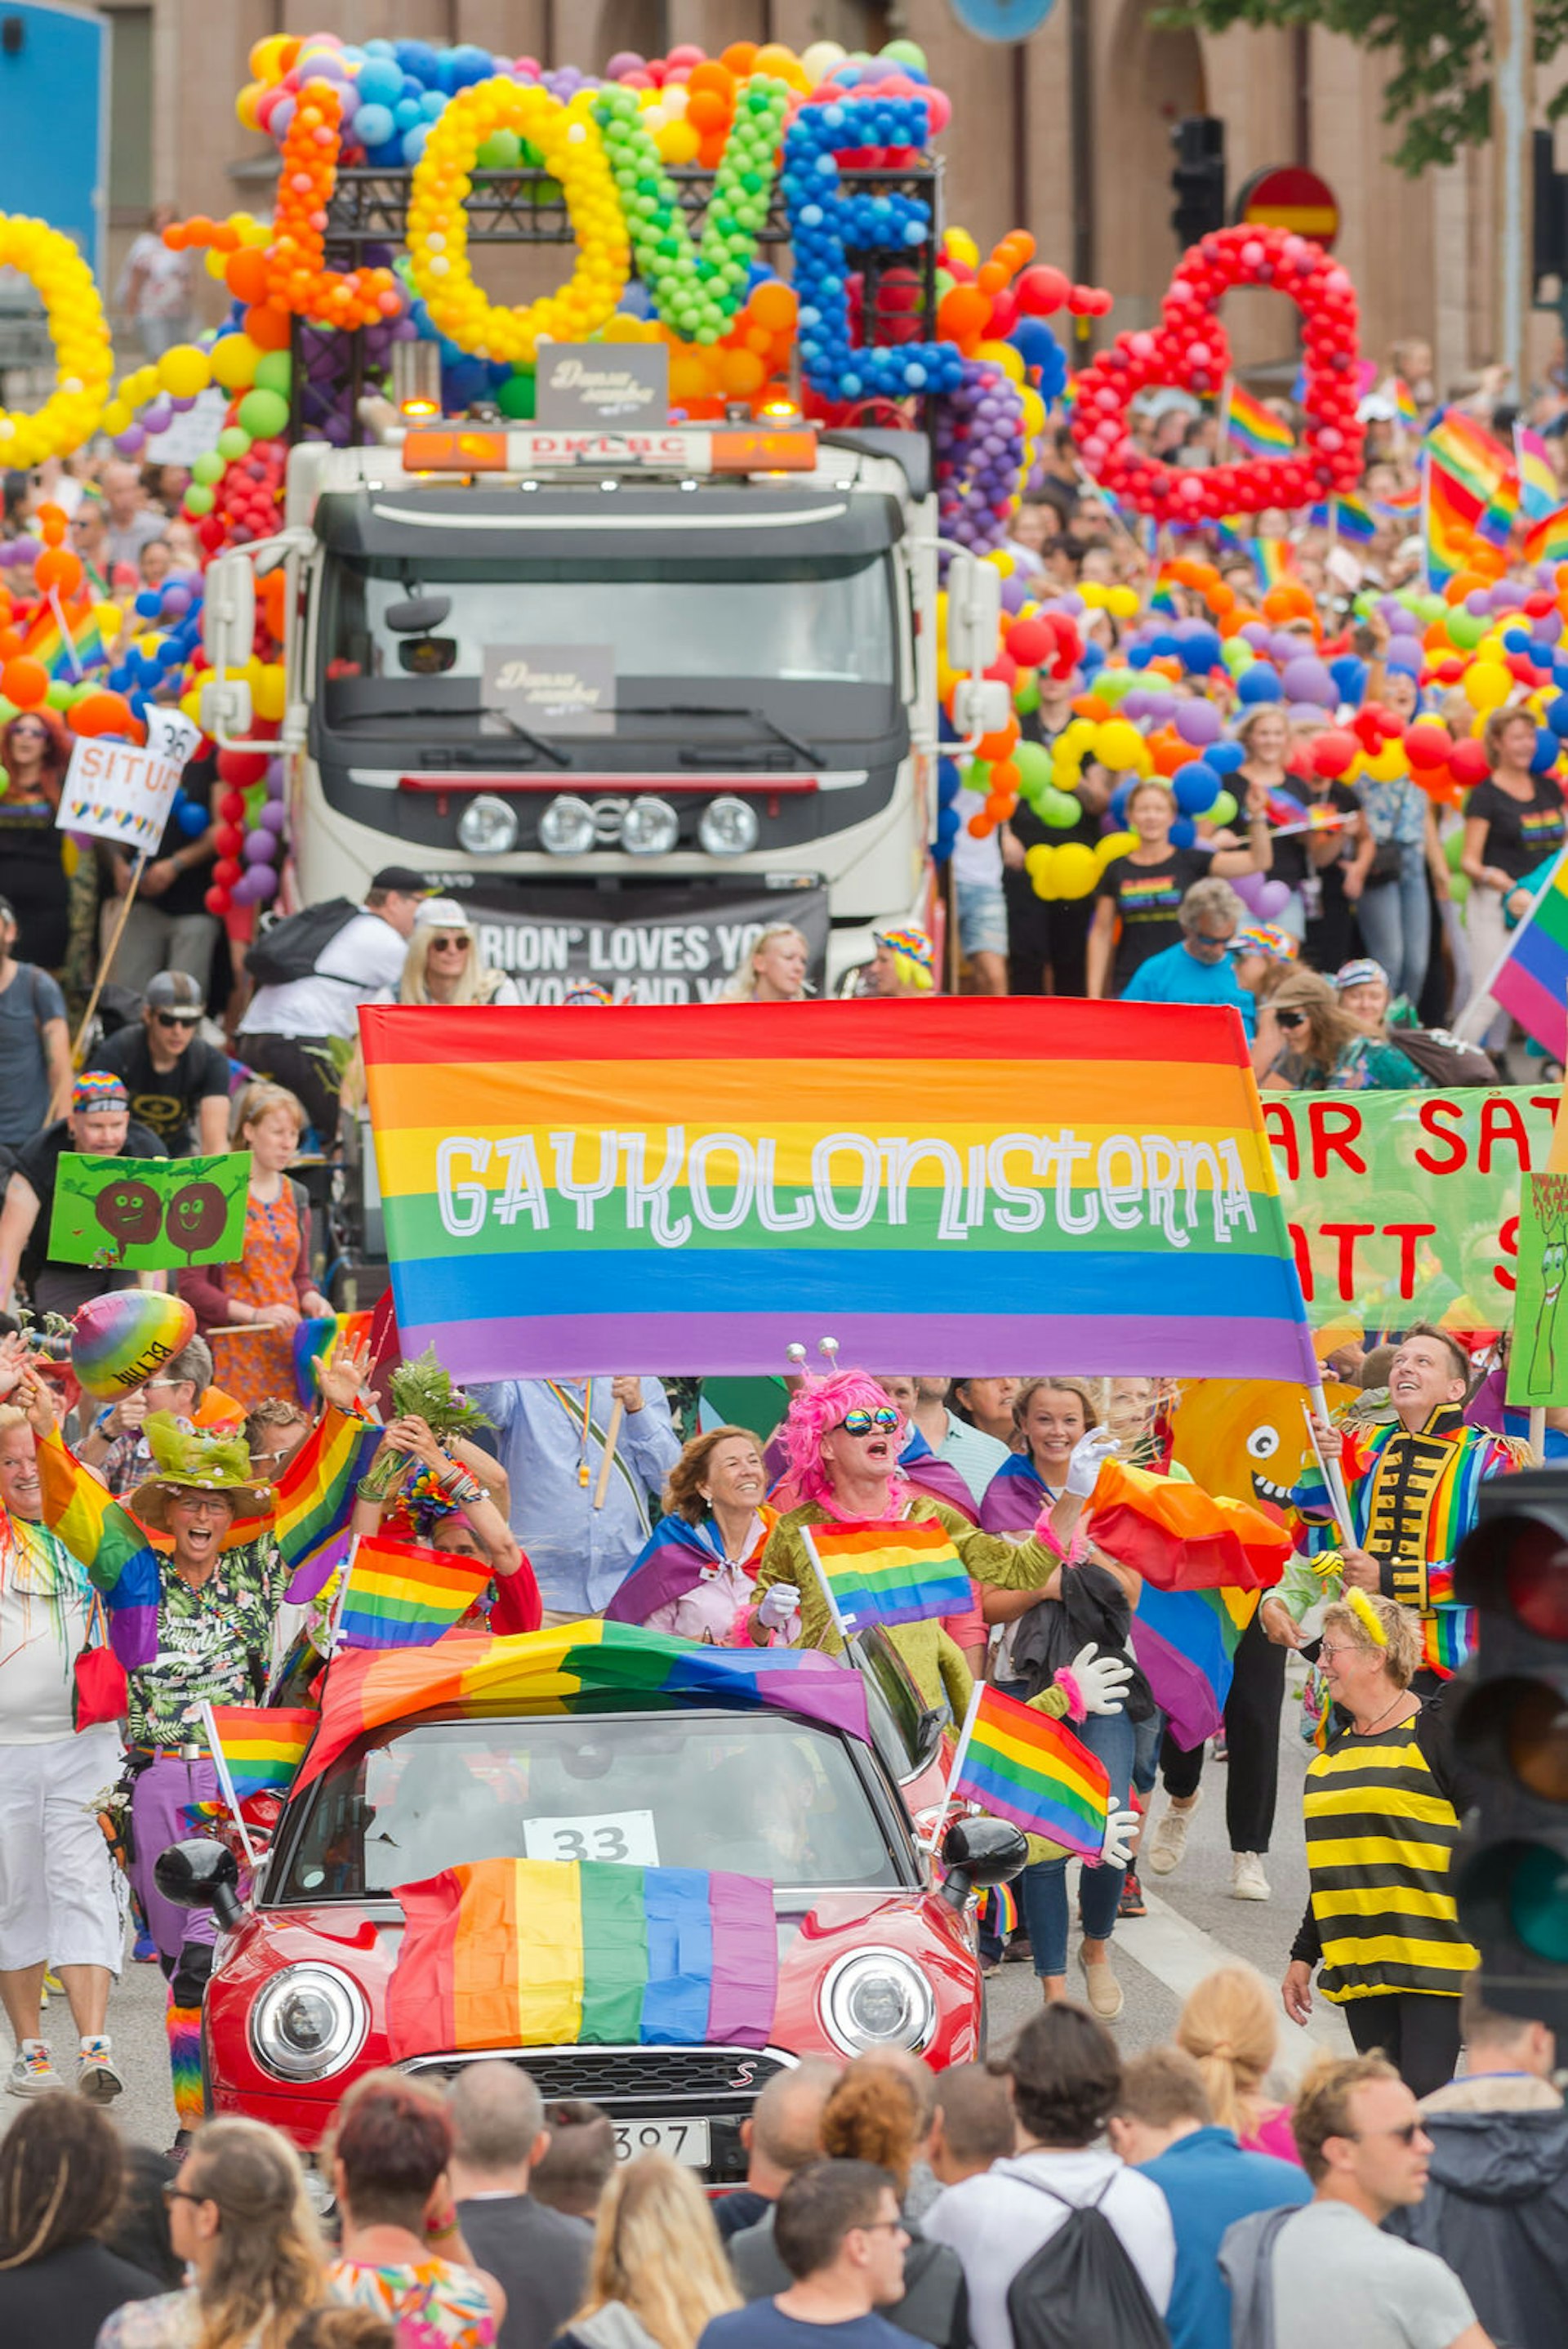 Truck with balloons spelling 'love', surrounded by crowds of marchers, at the Stockholm Pride Parade in 2017 © Stefan Holm / Shutterstock